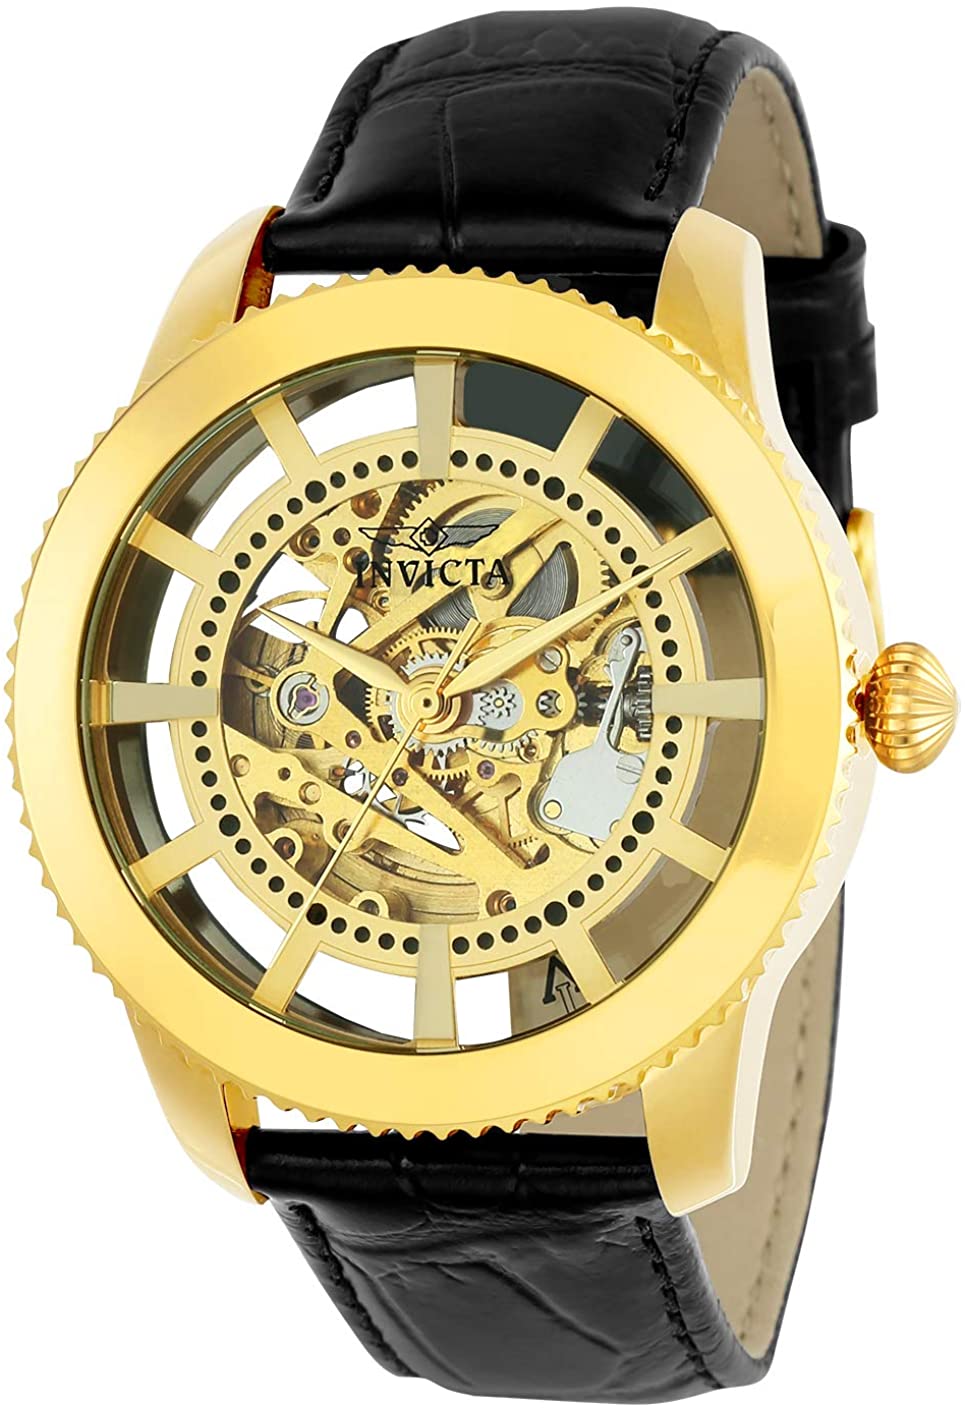 Invicta Men's 'Vintage' Automatic Stainless Steel and Leather Casual Watch, Color:Black/Gold Gold/Gold (Model: 22571, 22575)